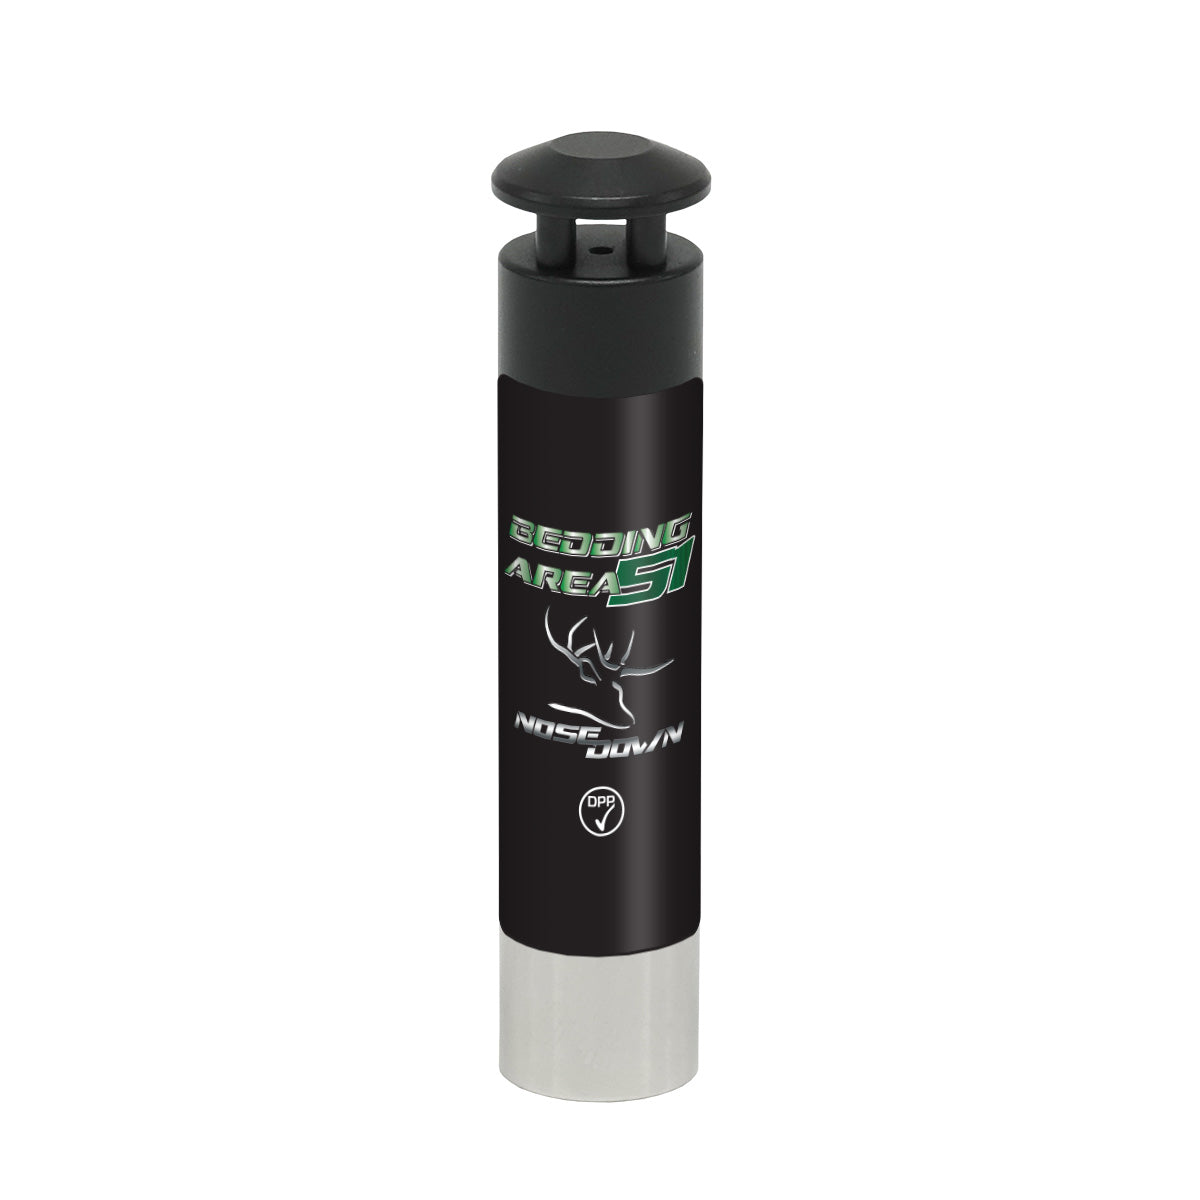 Wyndscent 2.0 Nose Down Bedding Area 51 Cartridge (Synthetic)